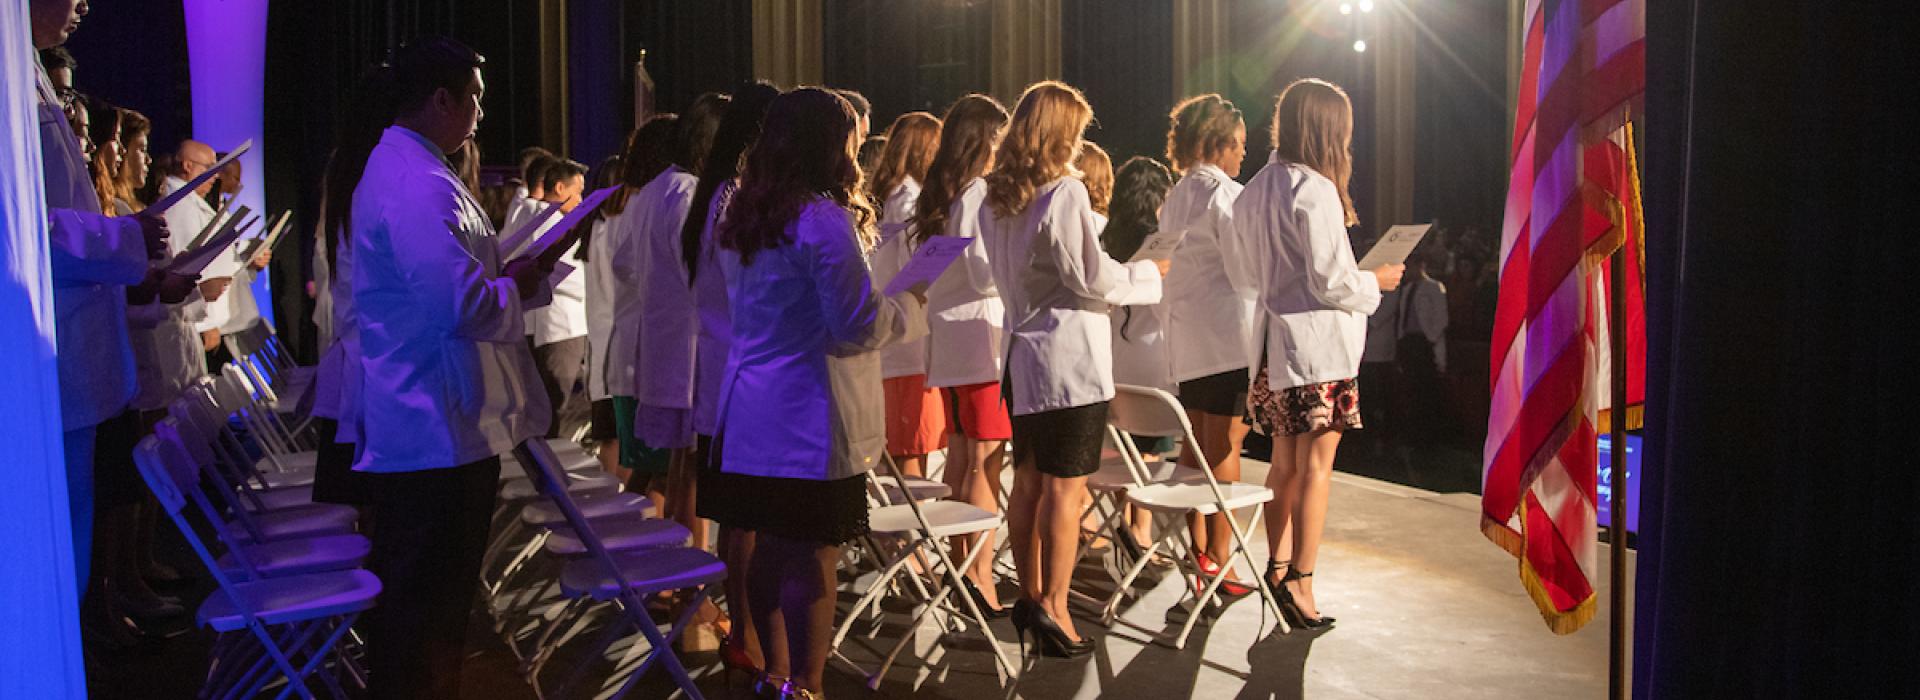 Behind the stage during White Coat Ceremony